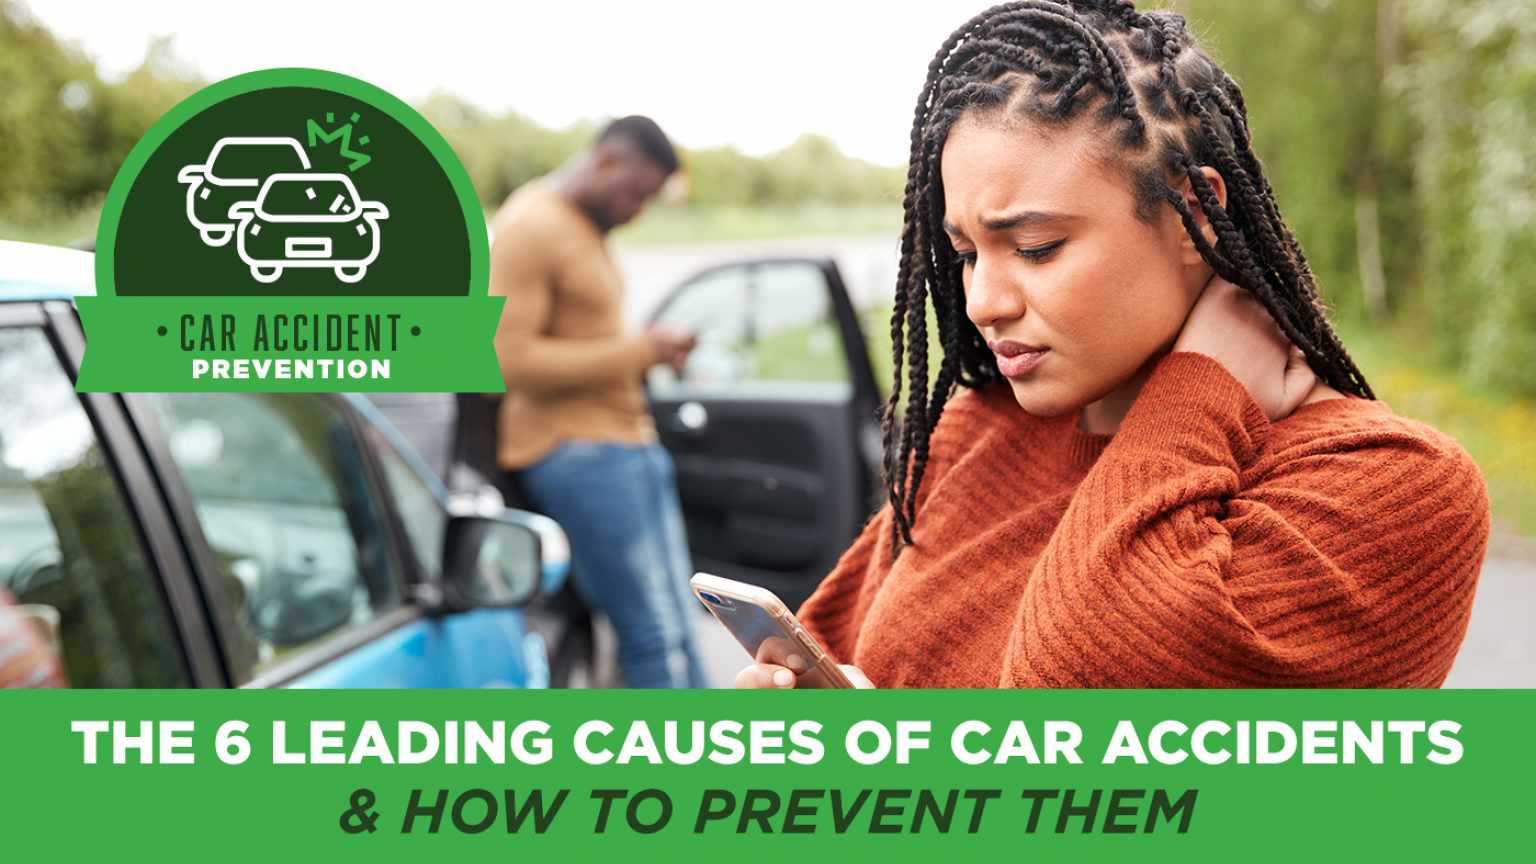 The 6 Leading Causes of Car Accidents & How to Prevent Them